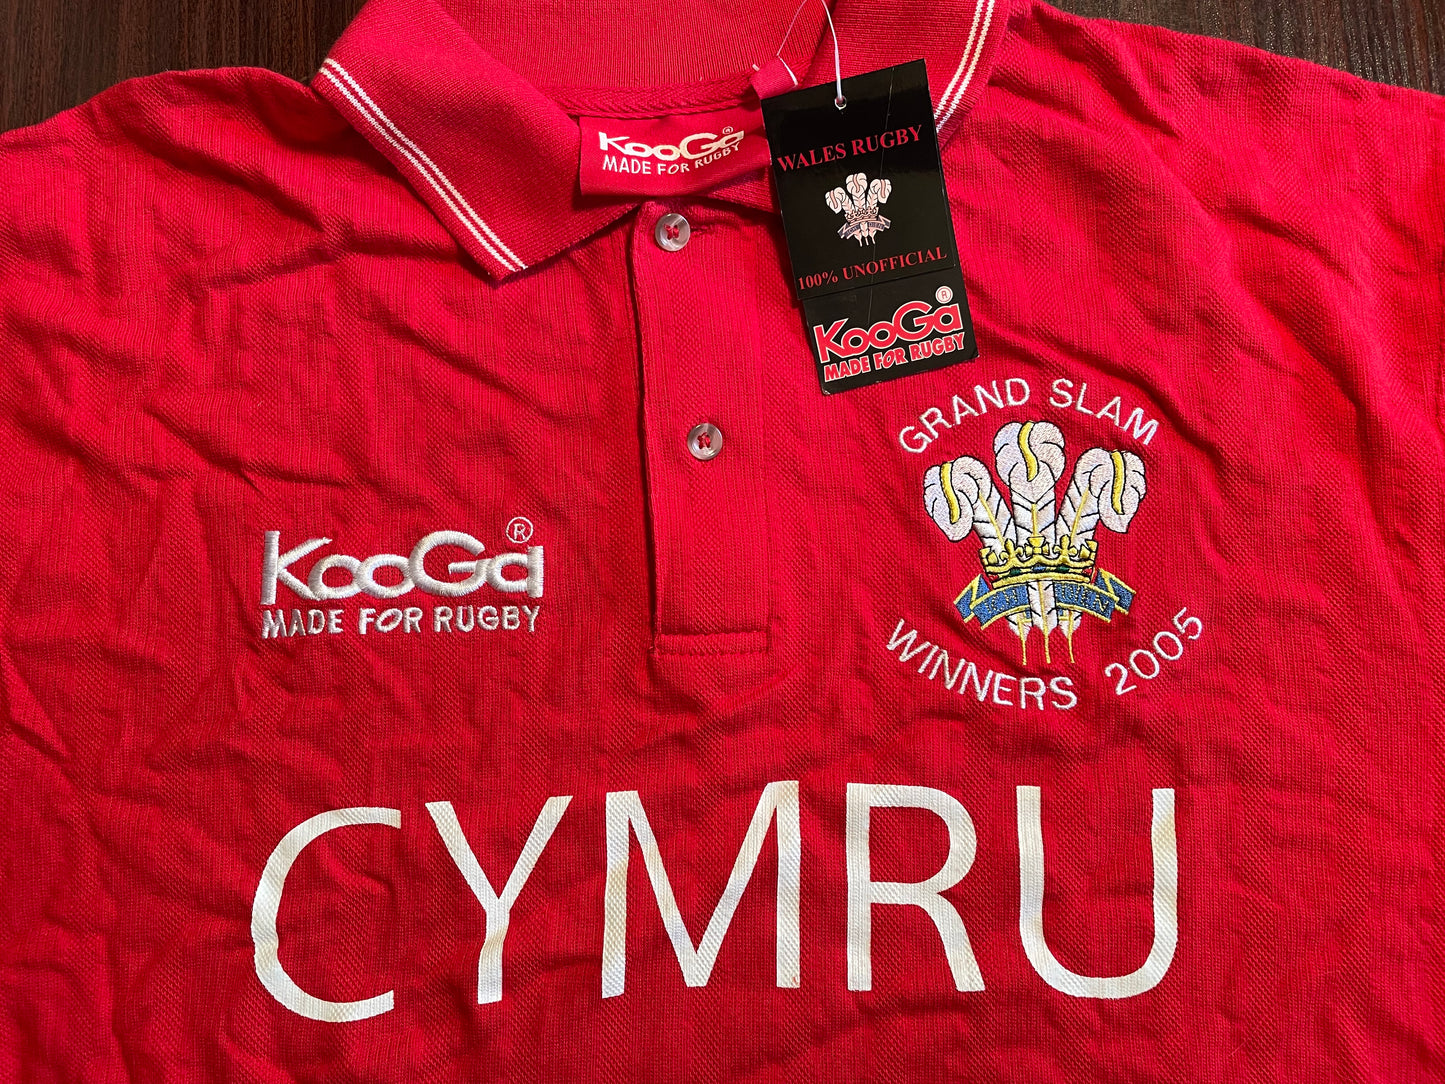 Wales Rugby Shirt 2005 (excellent) Adults Medium. Height 30 inches